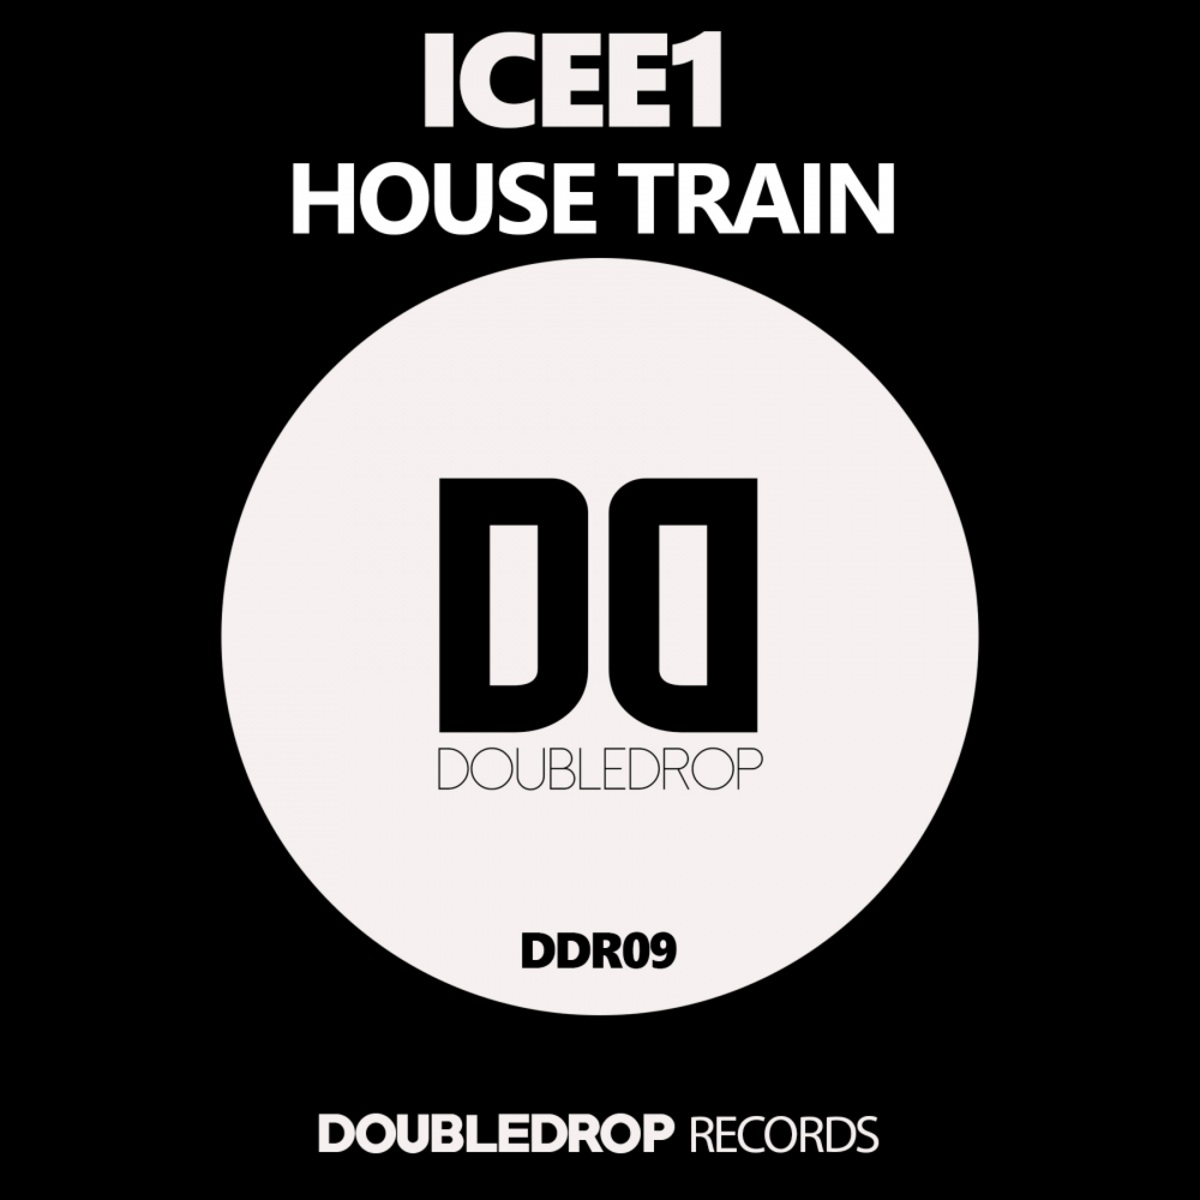 ICee1 - House Train / Double Drop Records